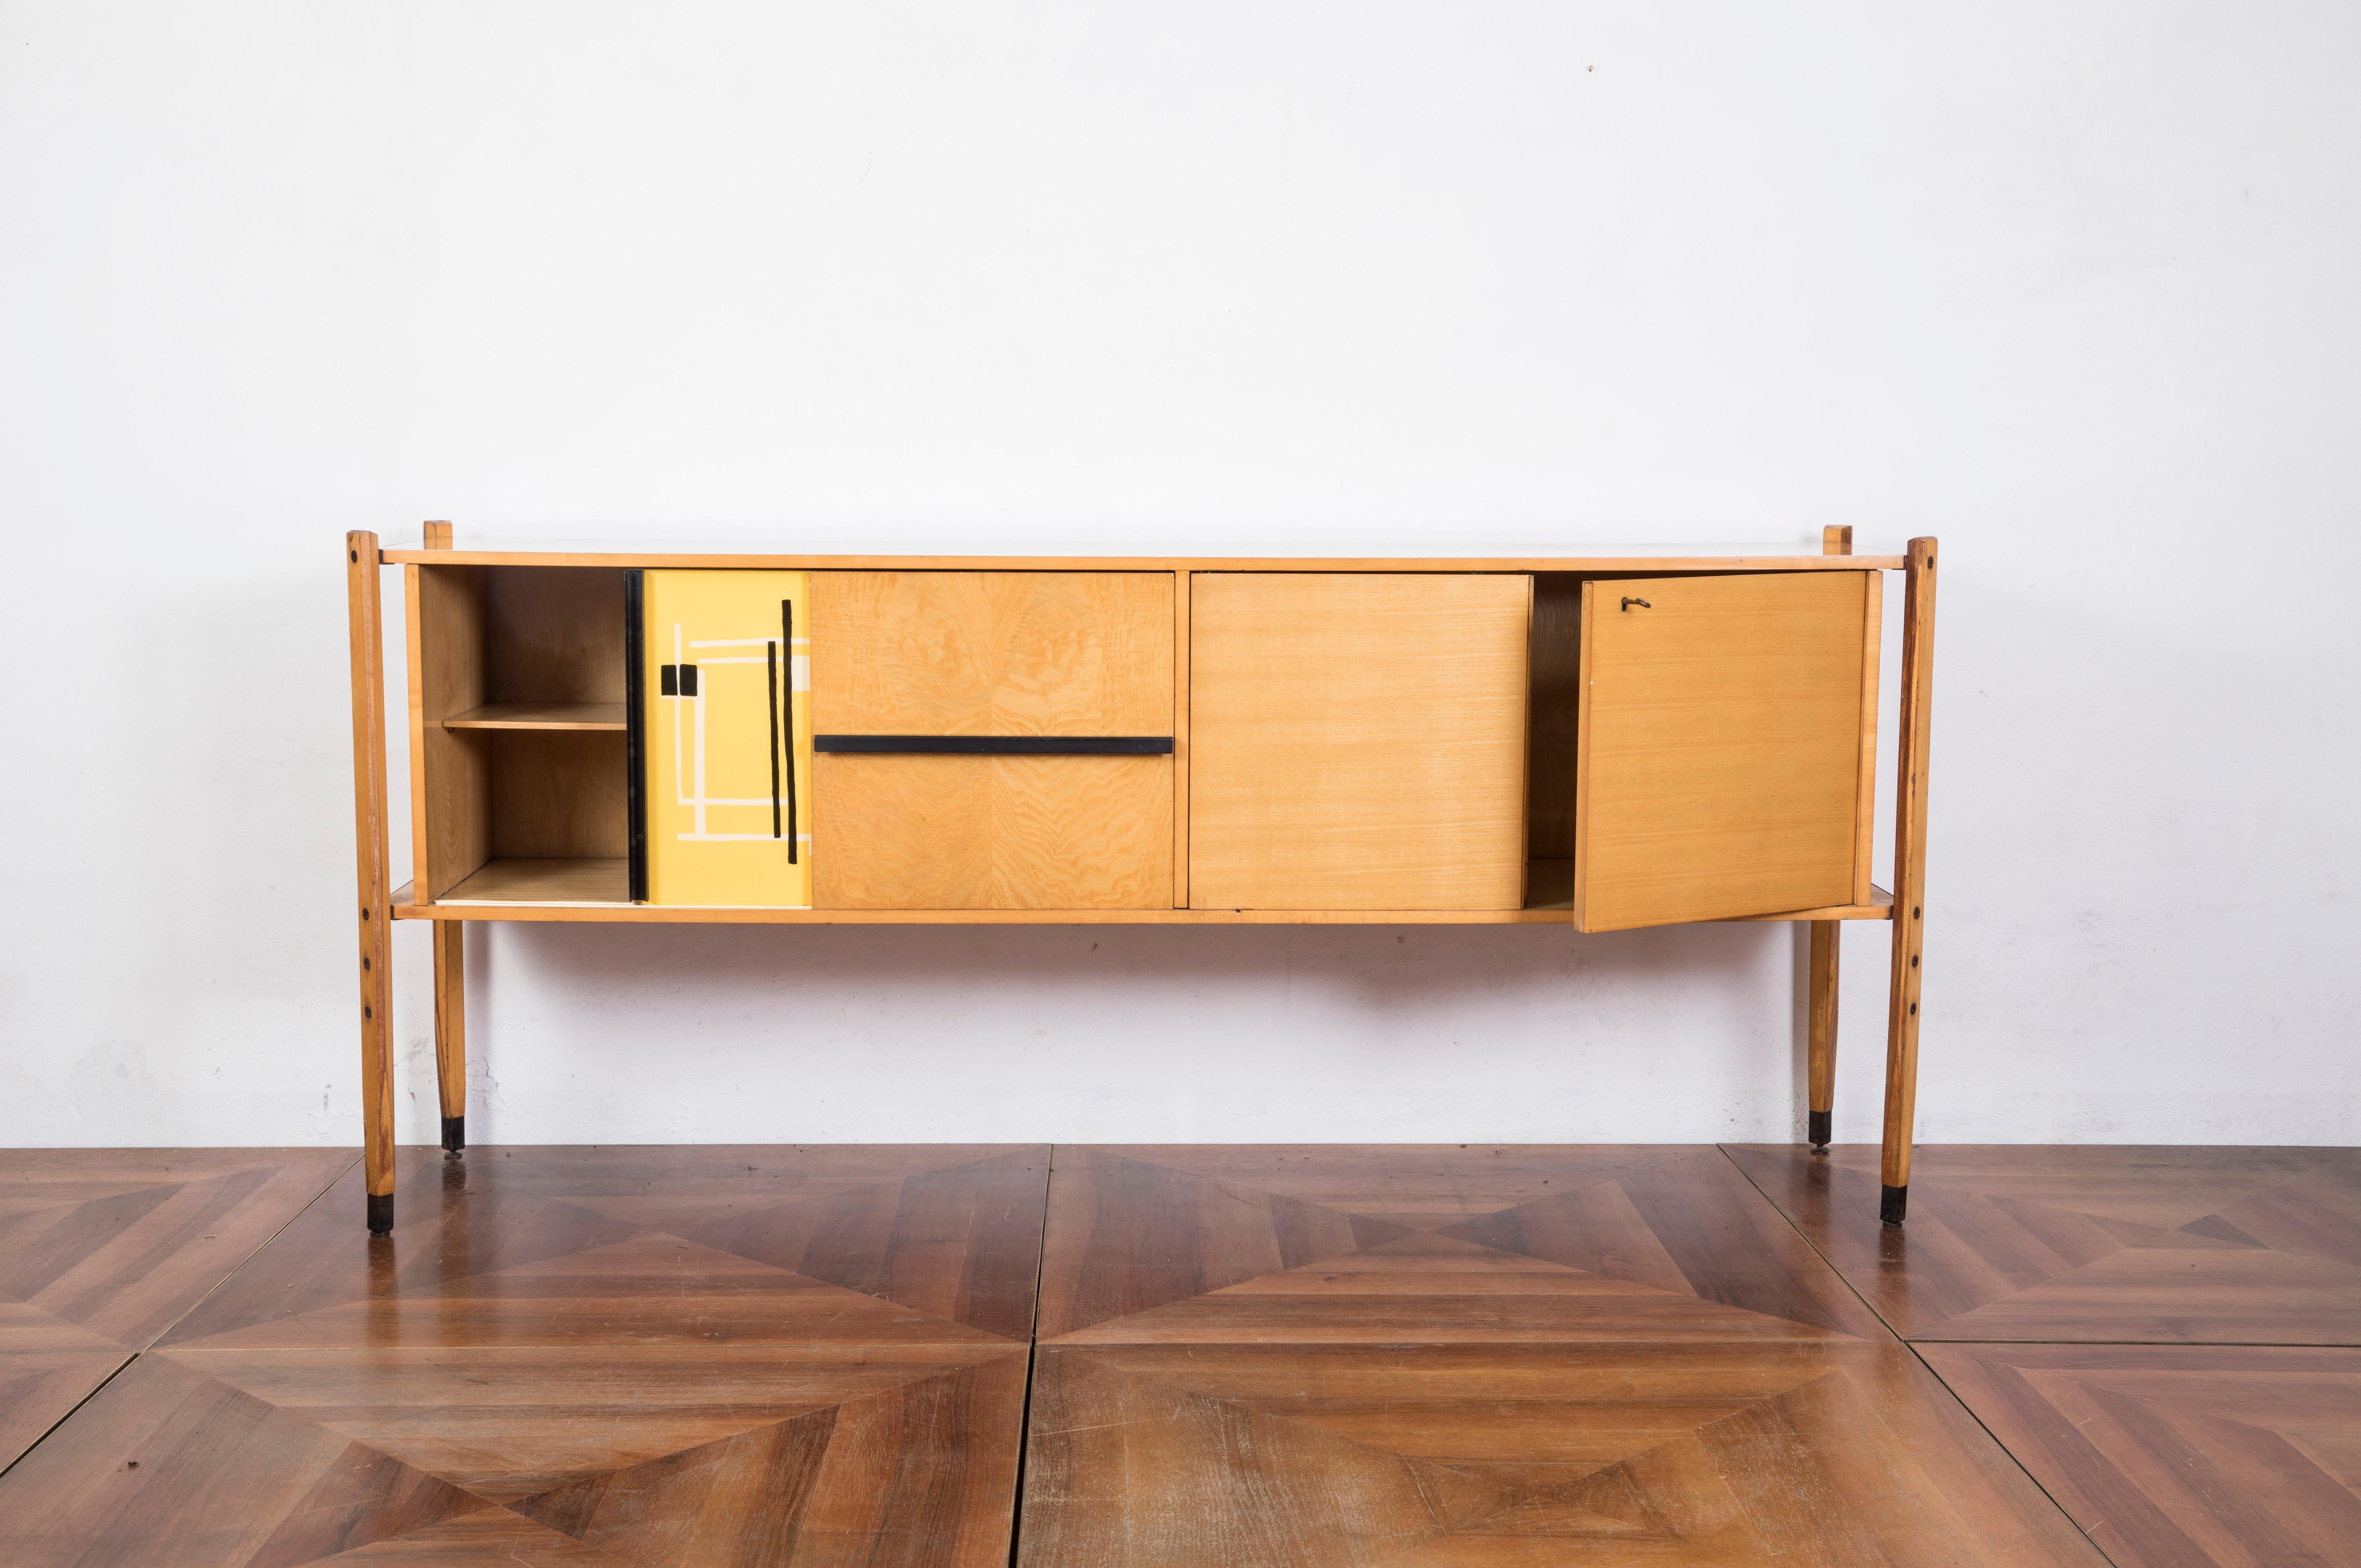 Very rare oakwood credenza designed by Roberto Aloi circa 1955, enameled steel, abstract black and yellow pattern printed plastic and glass.

Two sliding doors conceal, two adjustable shelves and two doors conceal storage compartment.